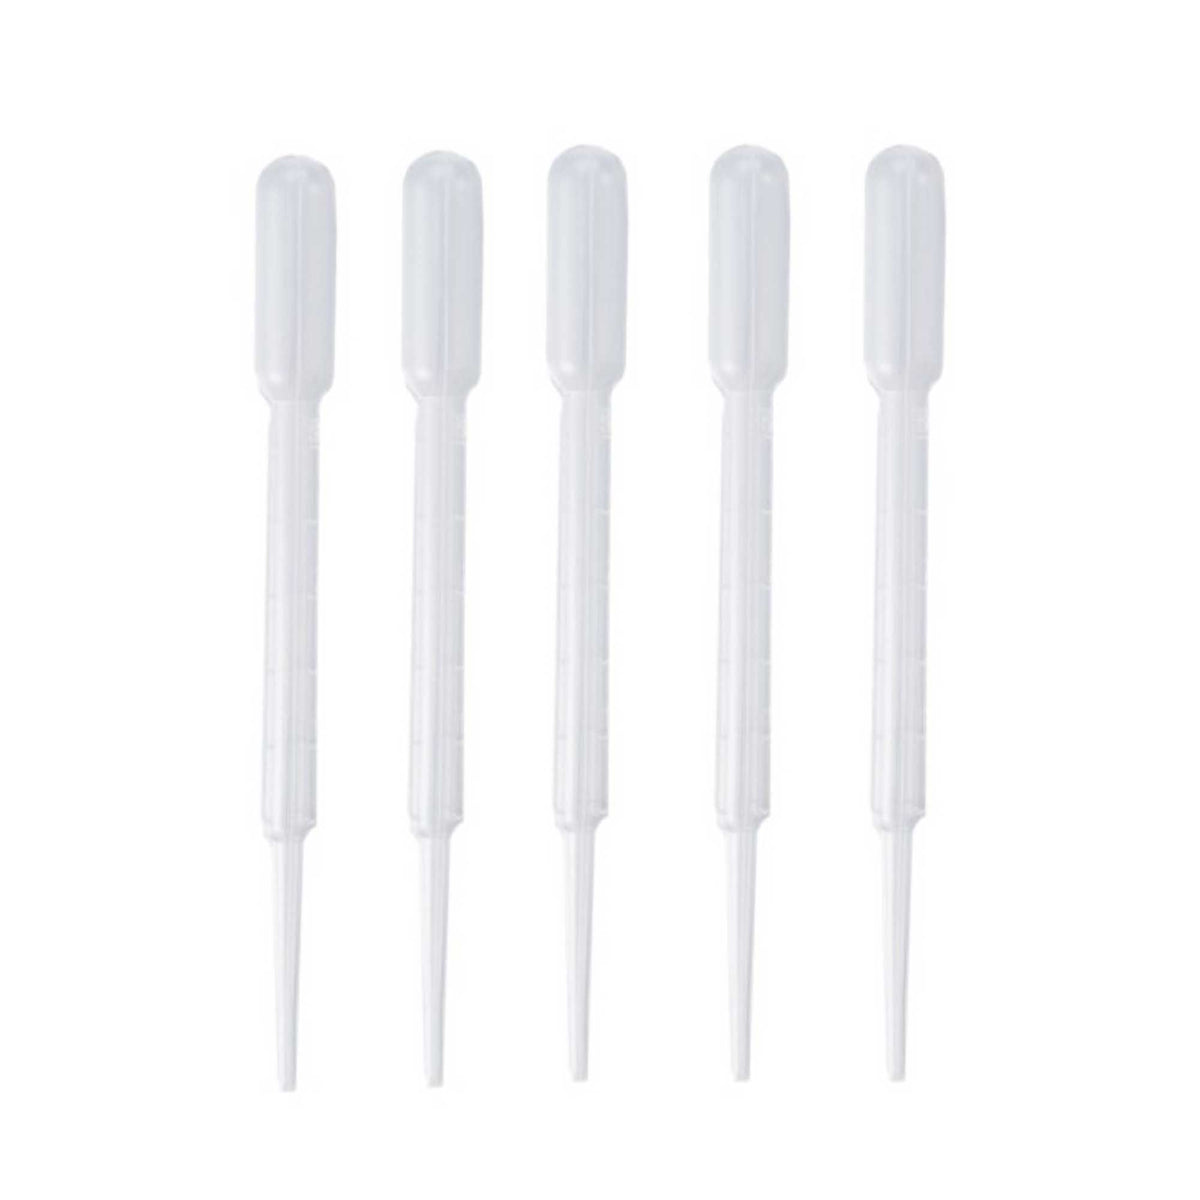 Koh-I-Noor Pipettes